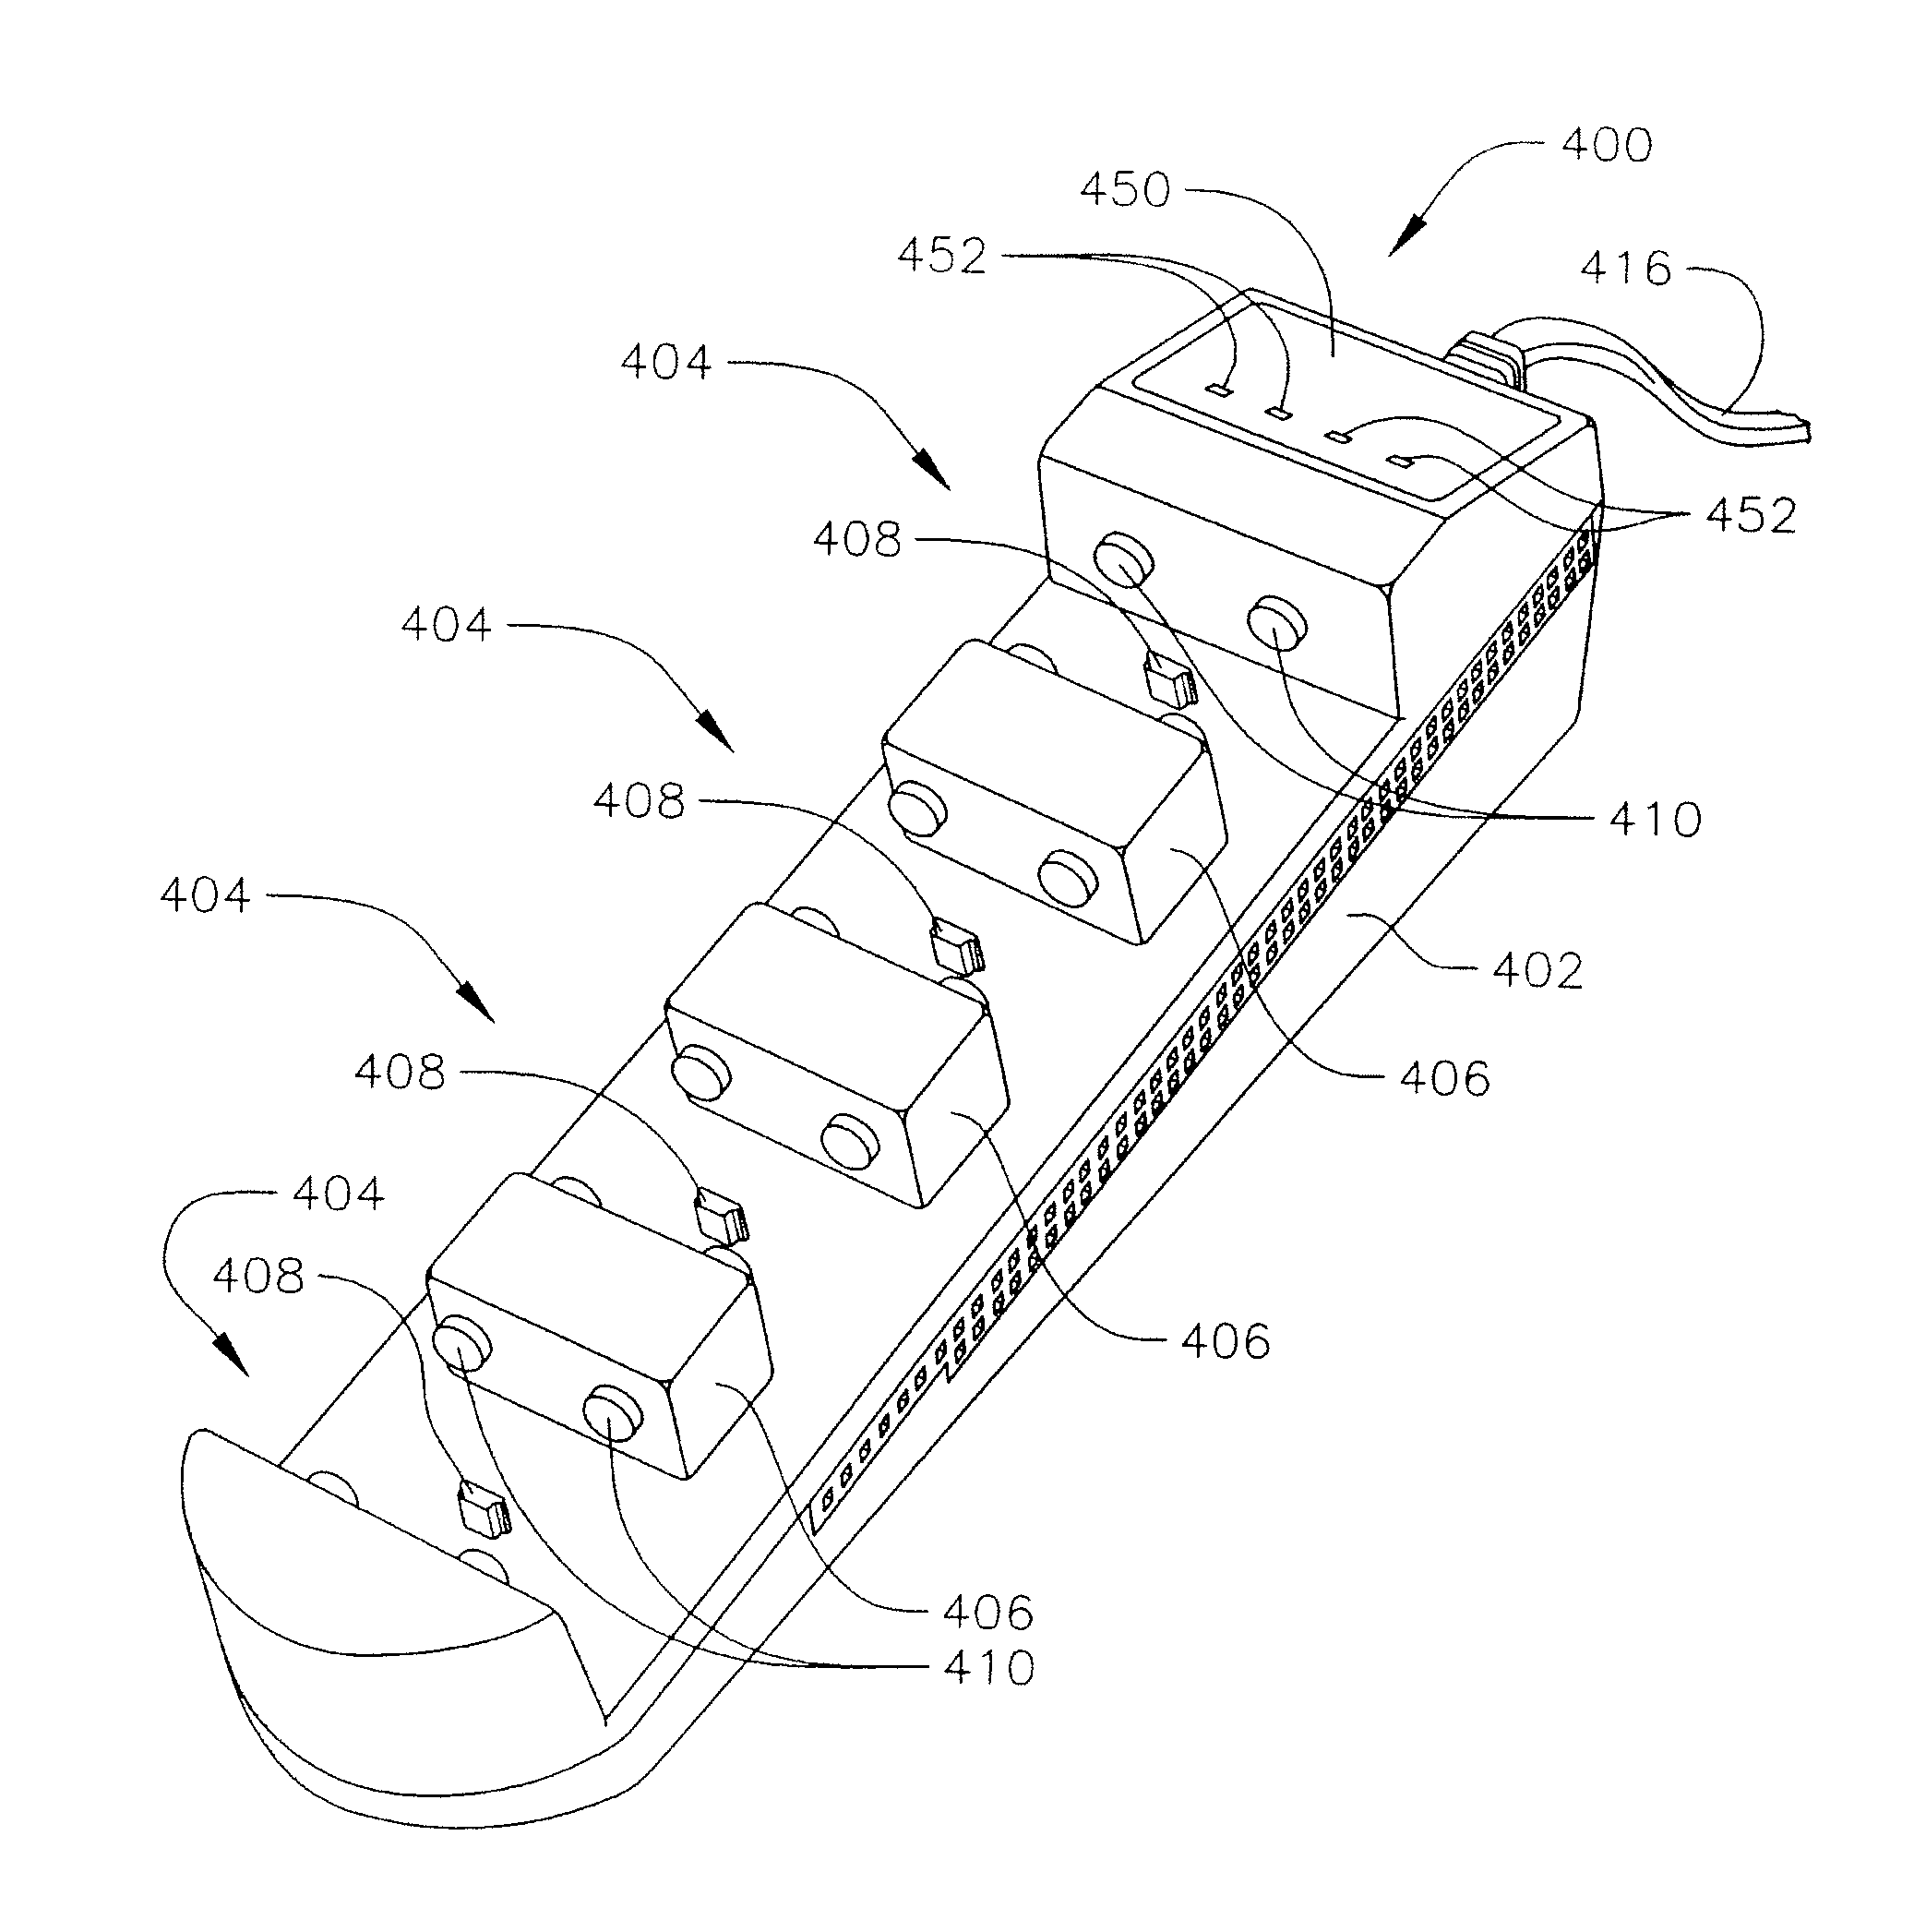 Video game controller charging system having a docking structure